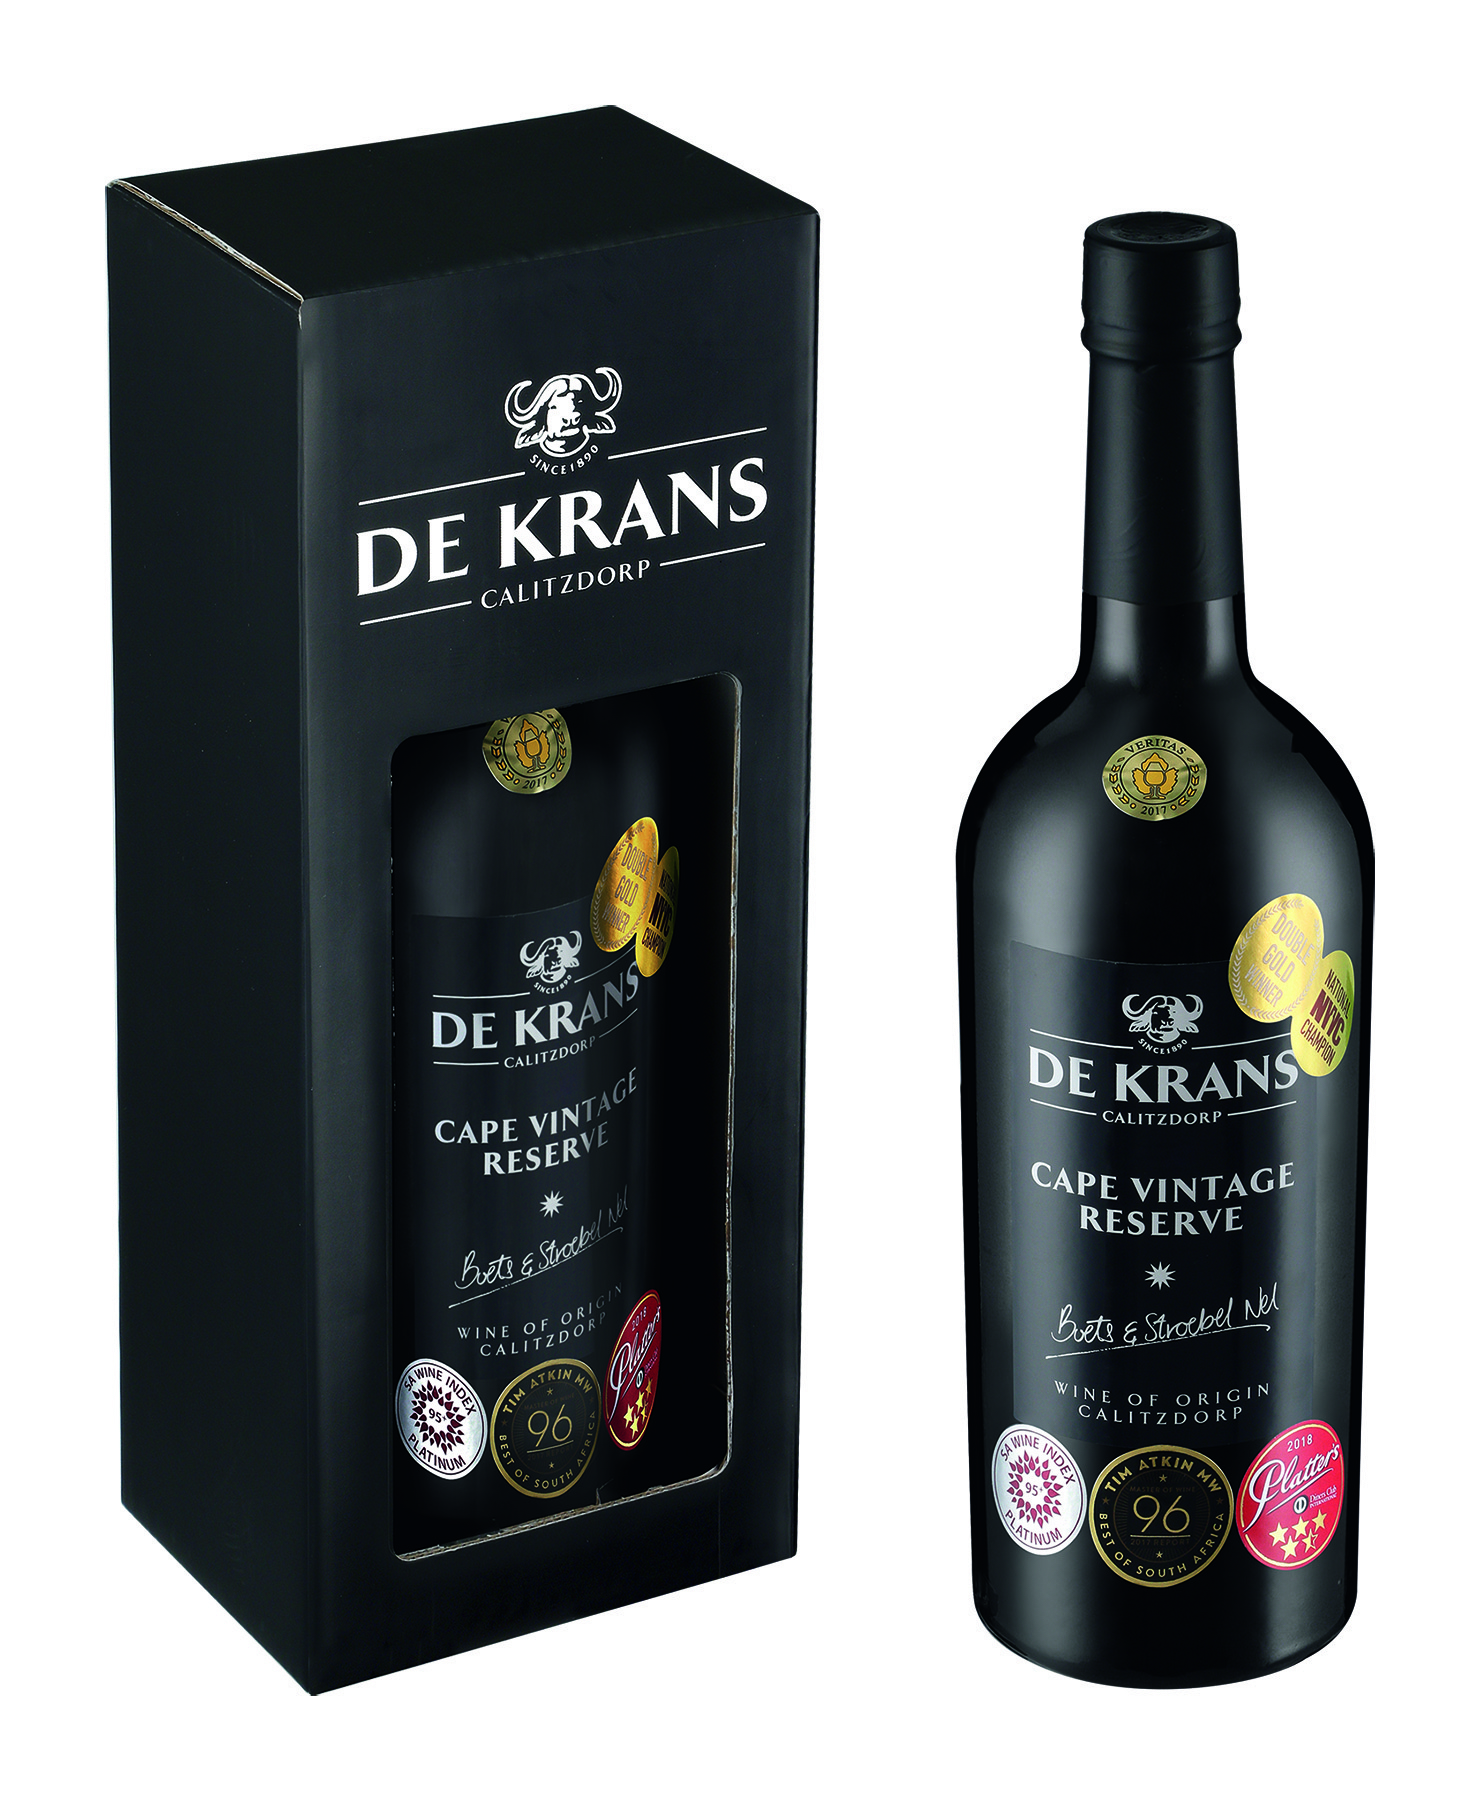 Stellar Results For De Krans In 2020 SA Wine And Cellar Classifications photo